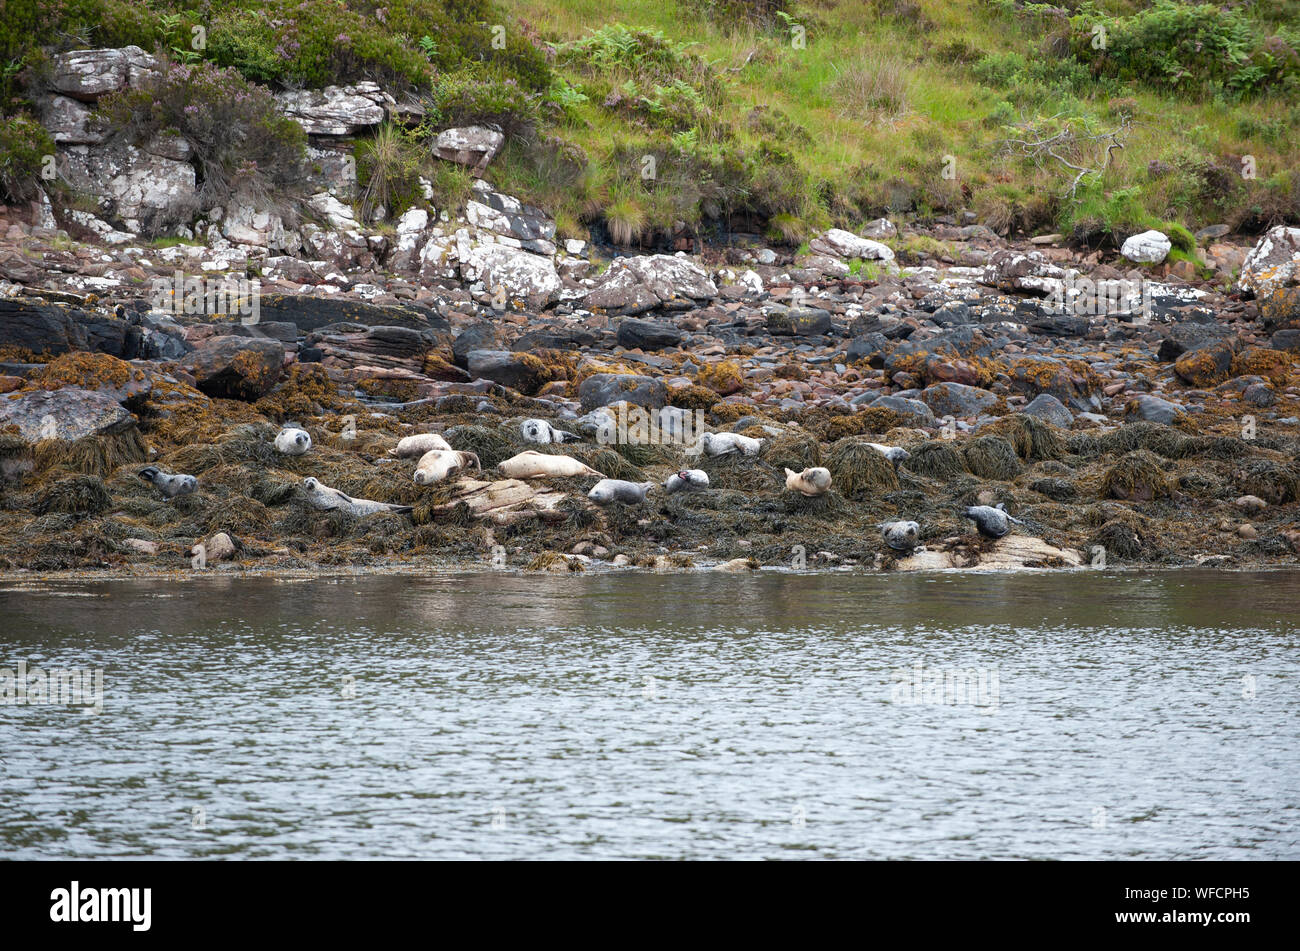 Harbour Seals, also known as Common Seals, Phoca vitulina, on island haul out, Summer Isles, Scotland, British Isles, UK Stock Photo